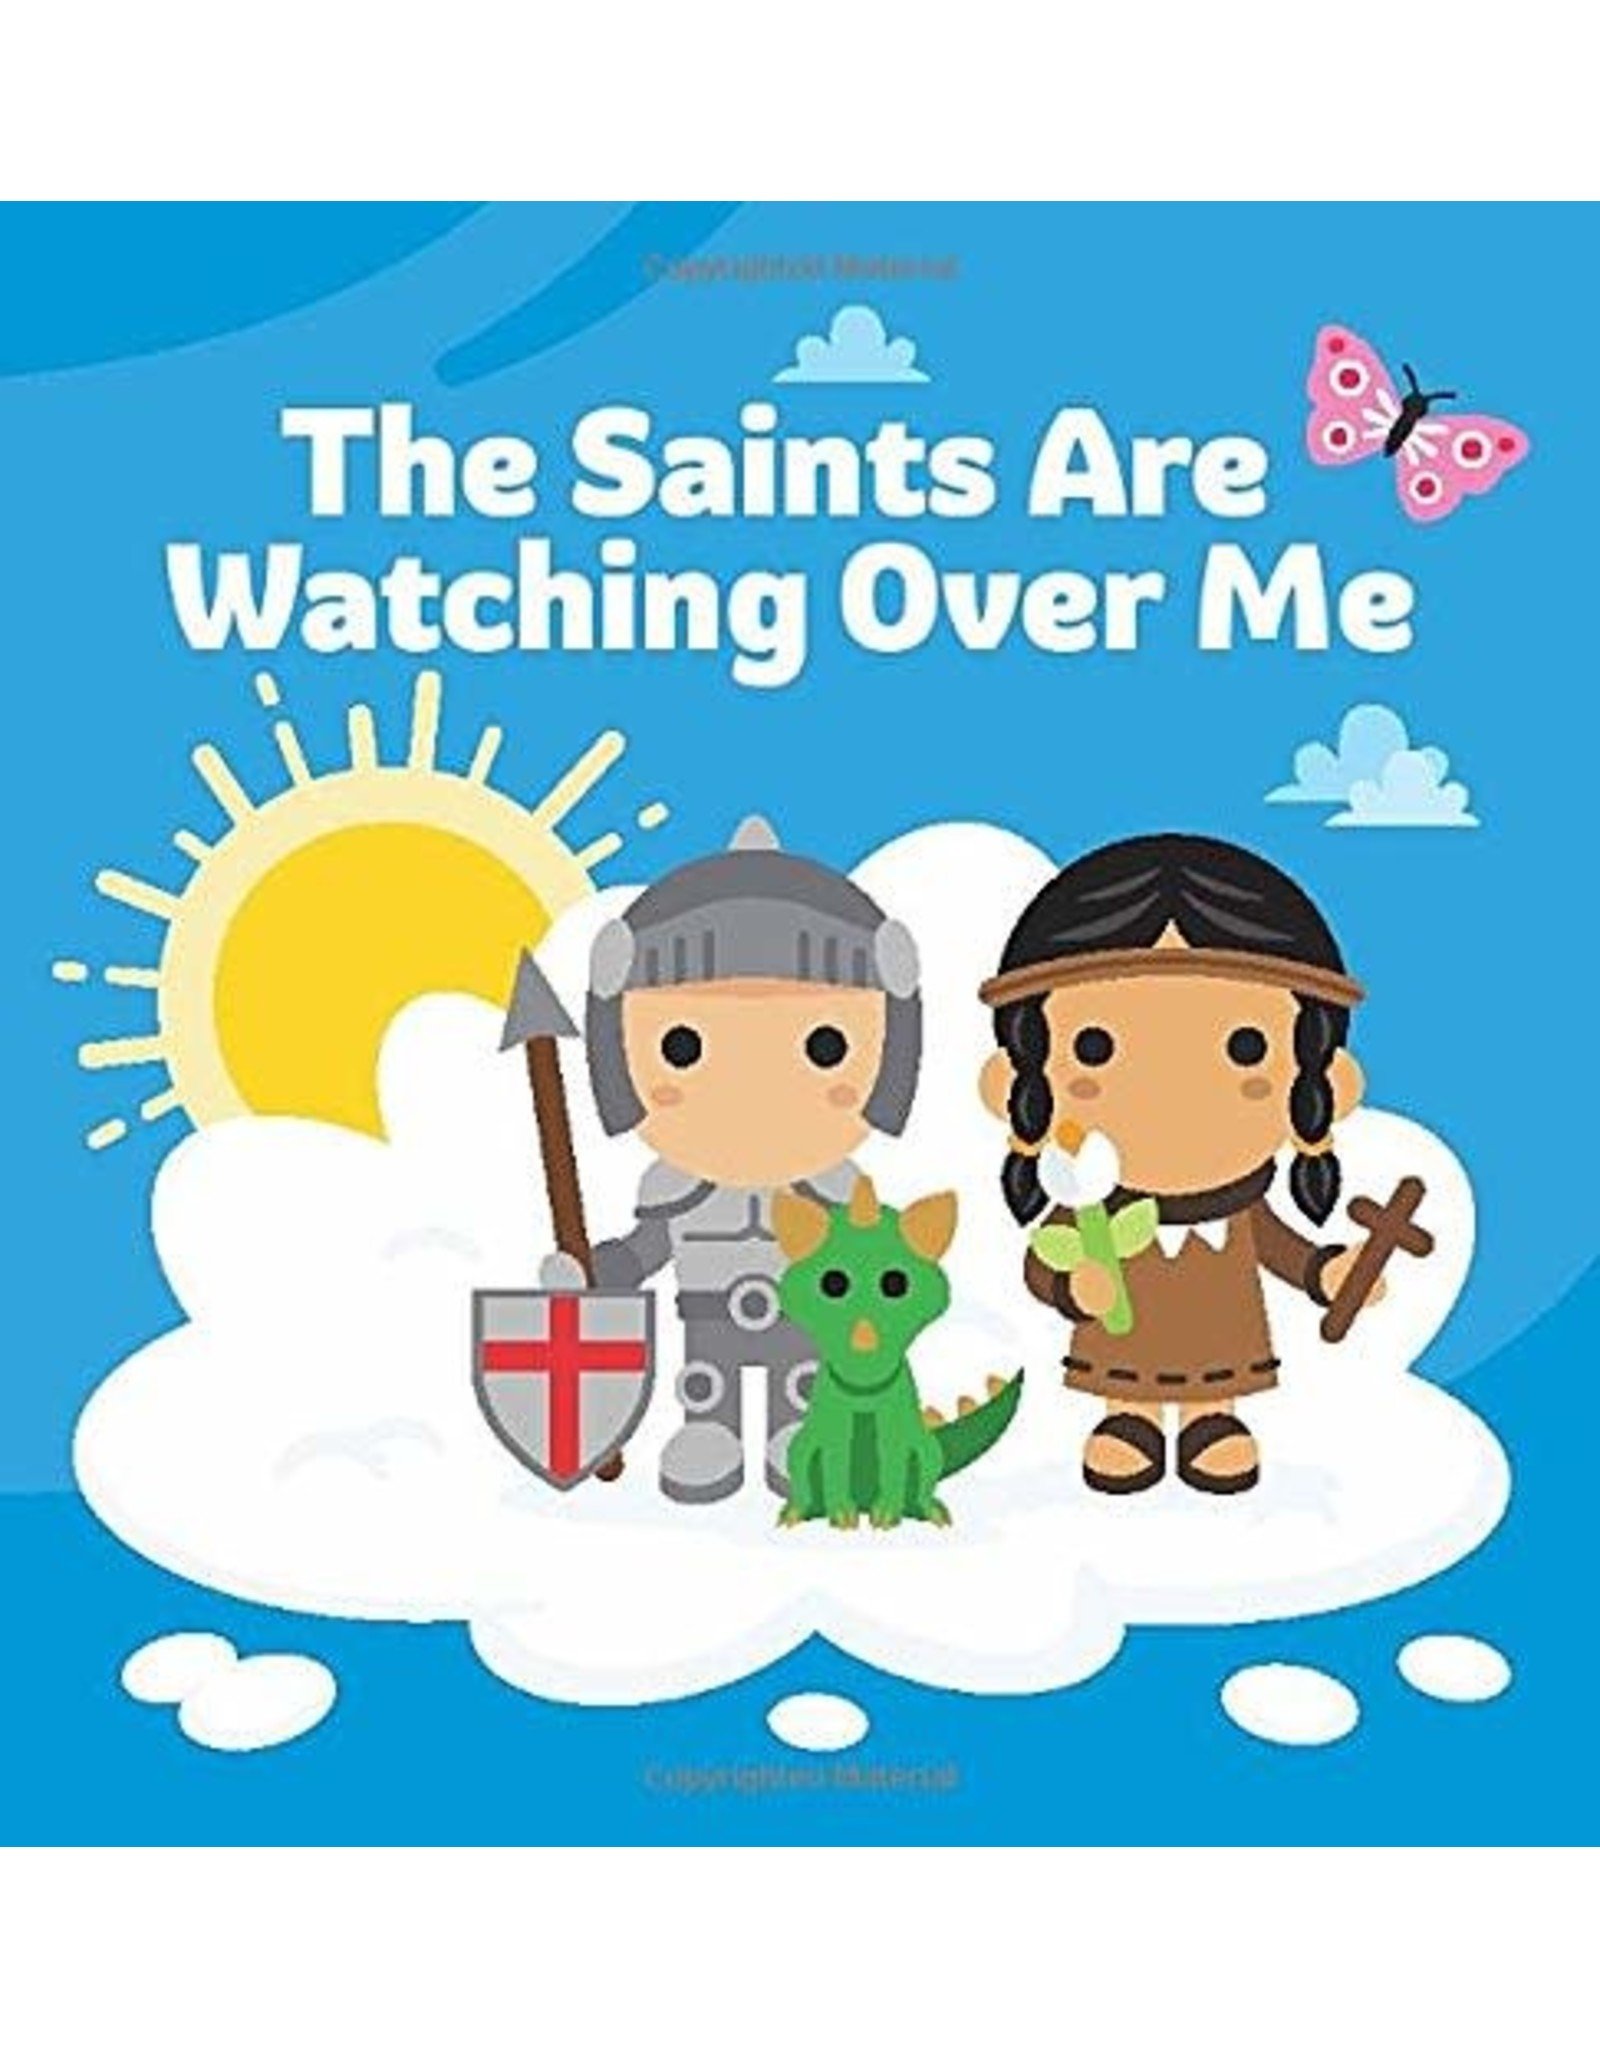 OSV (Our Sunday Visitor) The Saints Are Watching Over Me (Tiny Saints Board Book)